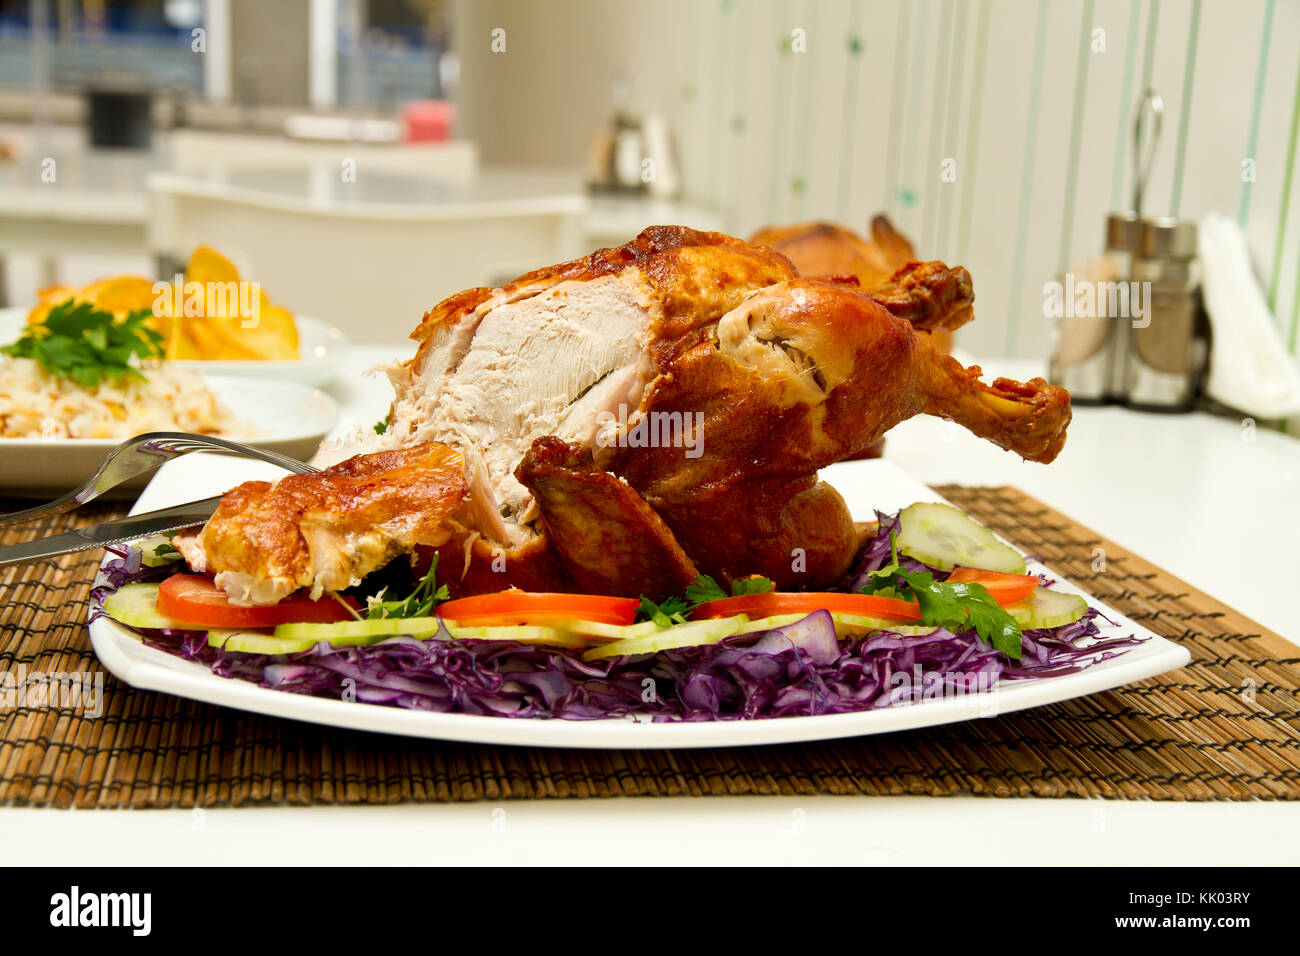 Charcoal baked chicken and side dishes Stock Photo